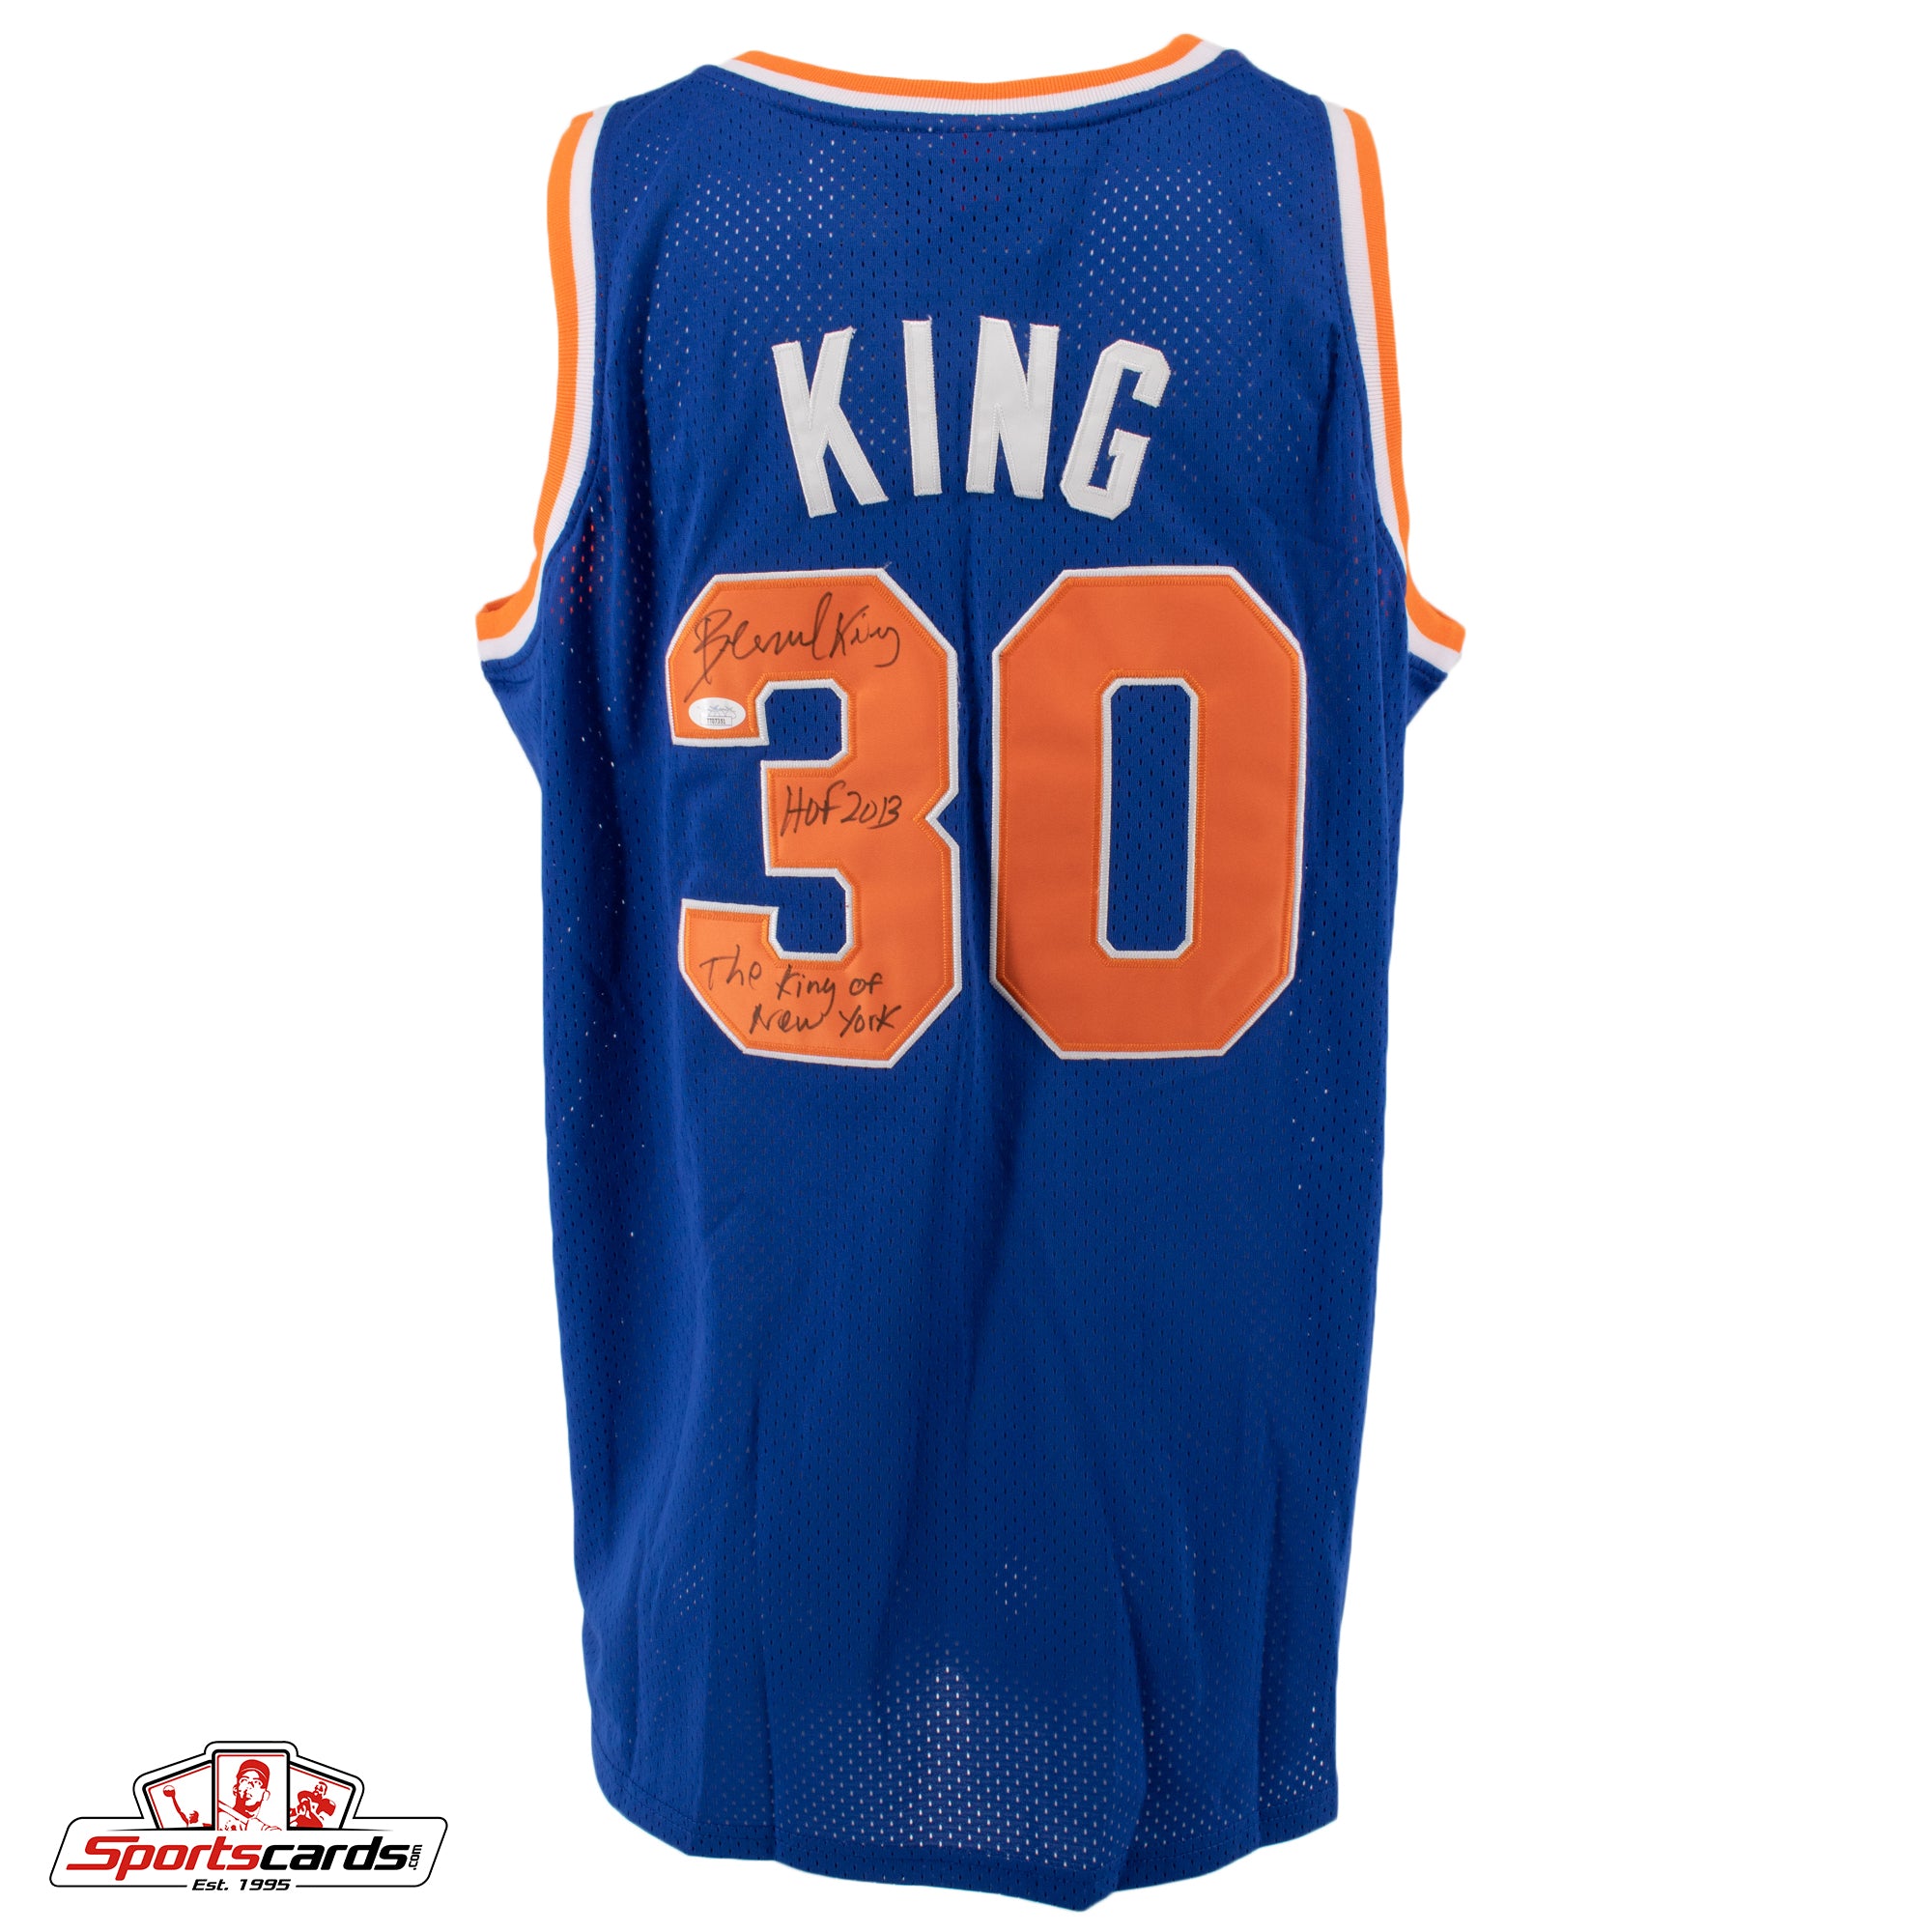 Bernard King It's Good to be King HOF 2013 Signed Autographed NY Kni 